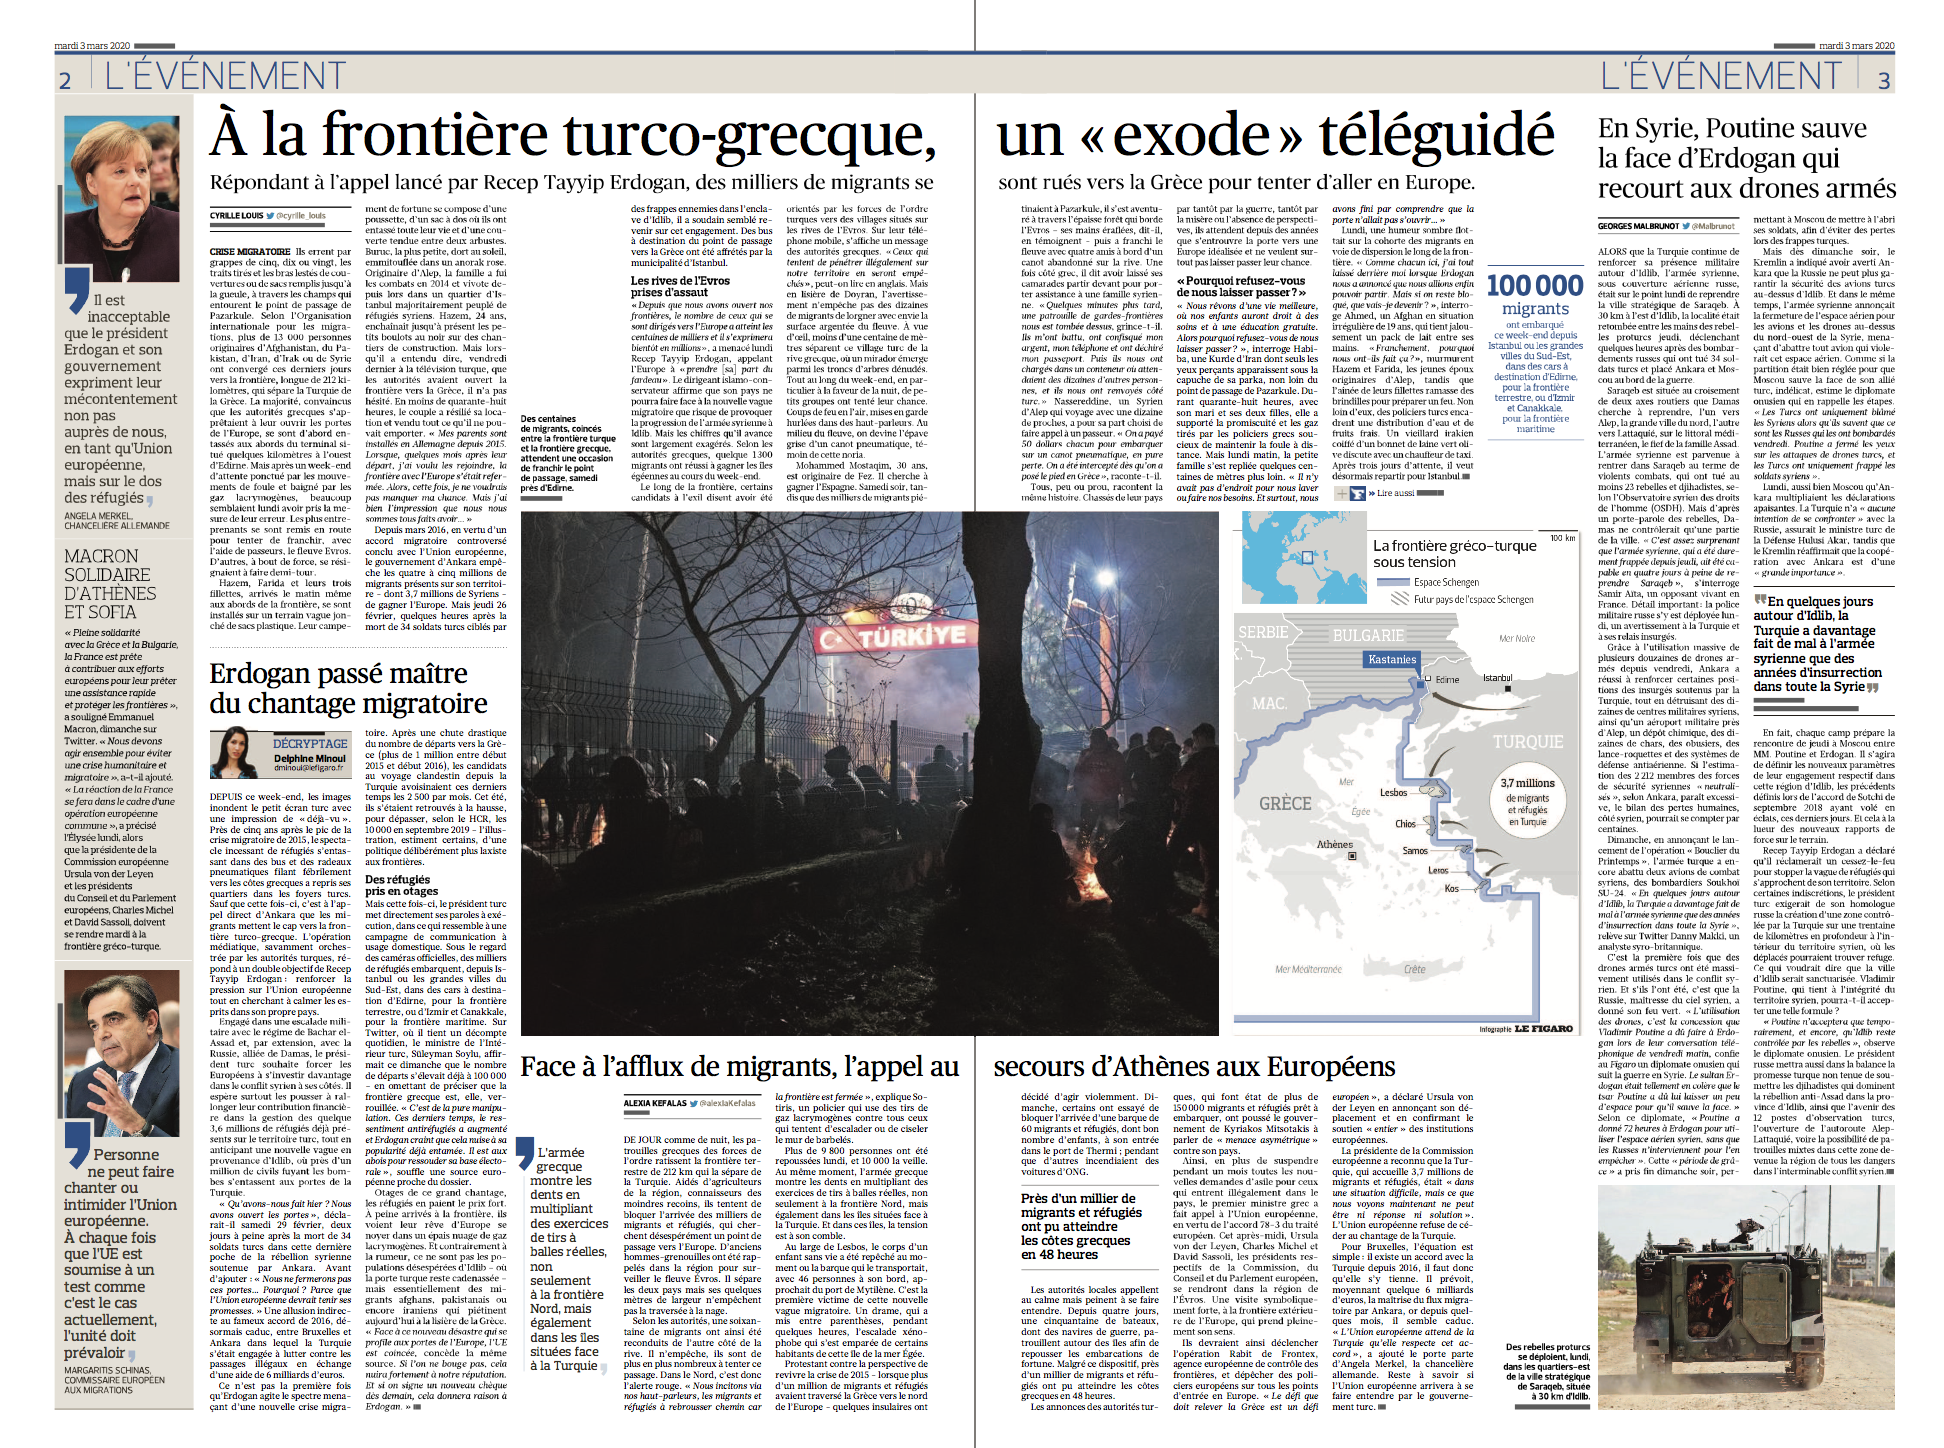 Publications - Assignment for Le Figaro